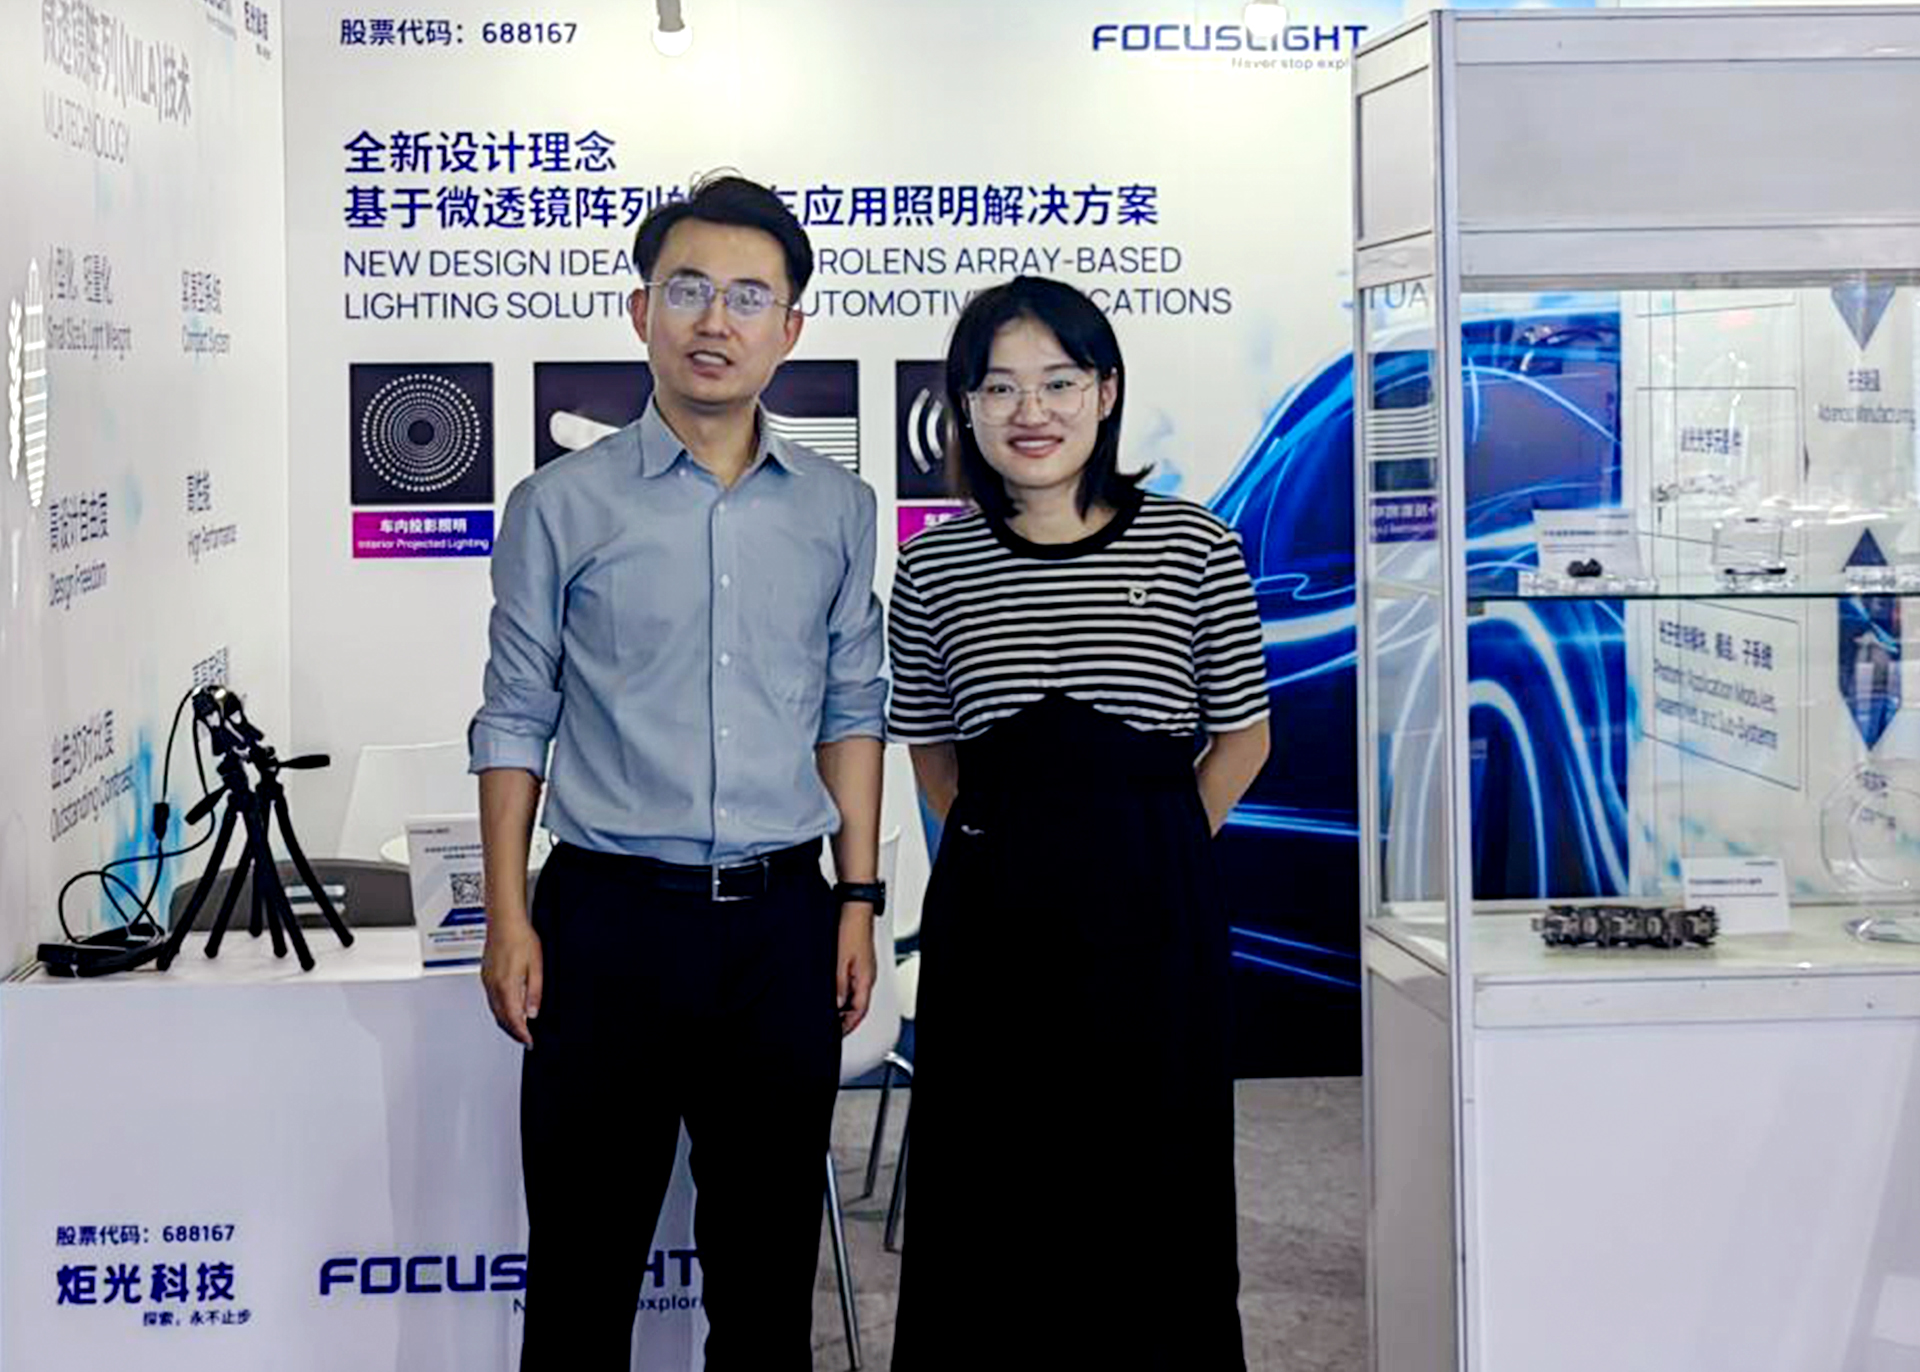 Focuslight is Exhibiting at The 19th Auto Lamp Industry Development Technology Forum and Shanghai lnternational Auto Lamp Exhibition（ALE）